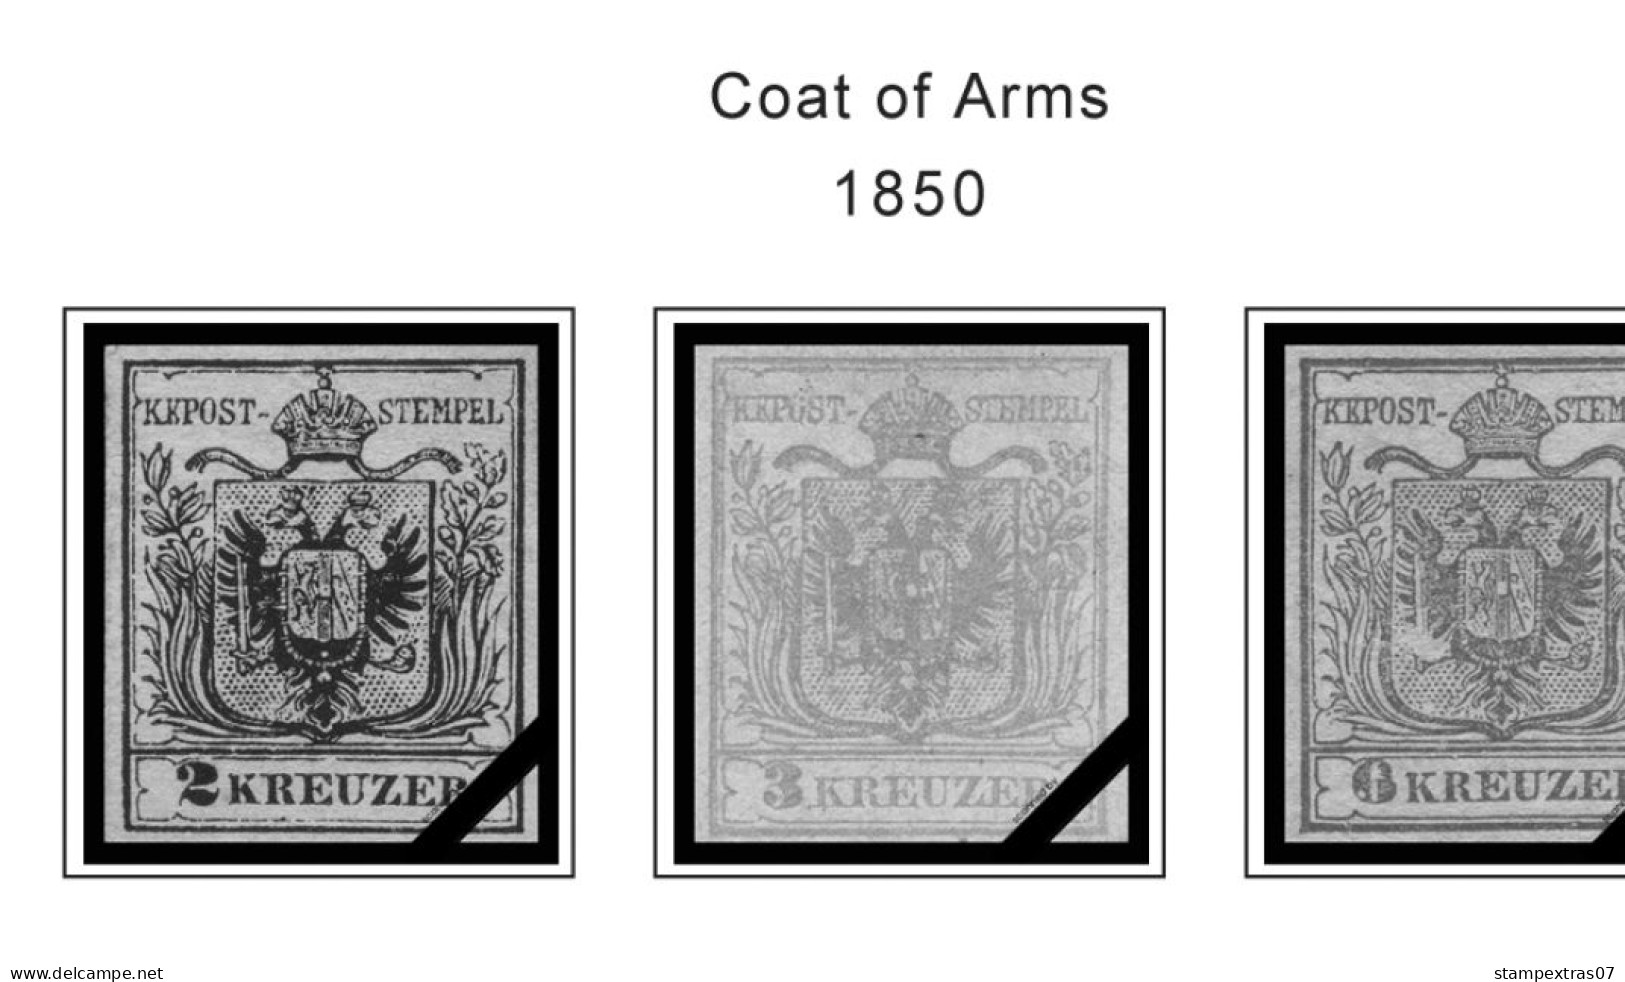 AUSTRIA 1850-2010 + 2011-2020 STAMP ALBUM PAGES (417 B&w Illustrated Pages) - Englisch